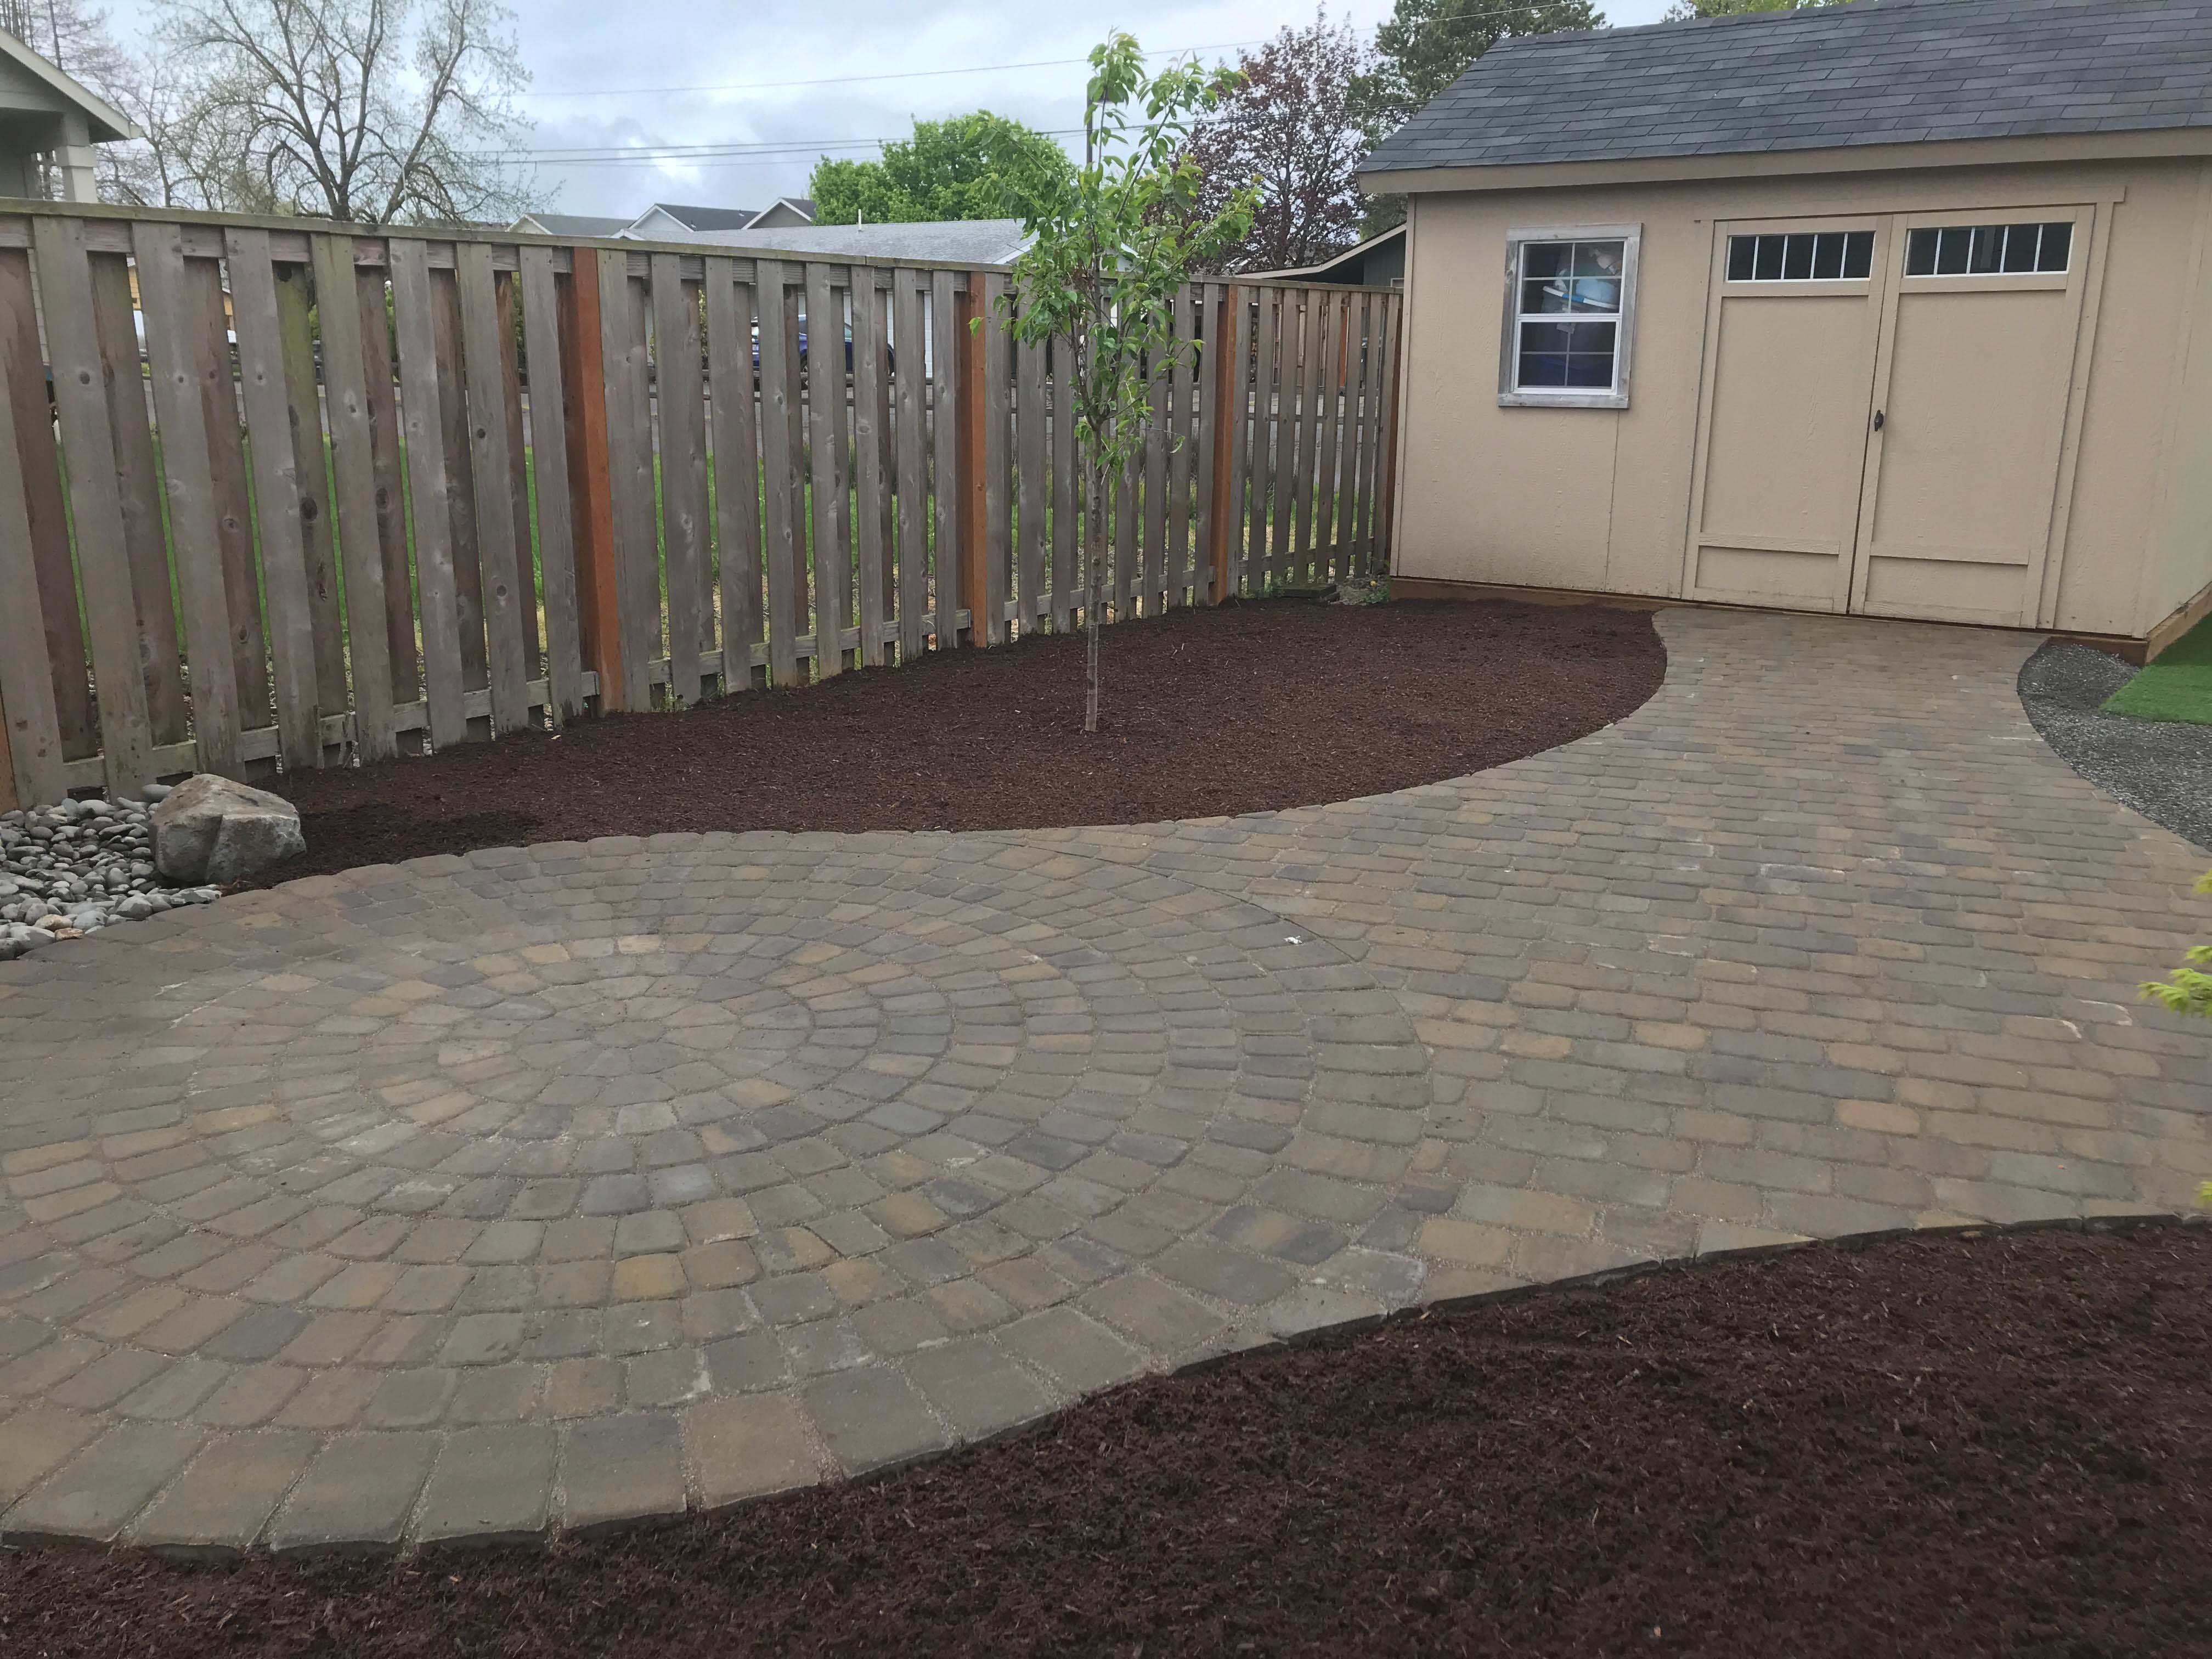 Freshly laid mulch with new trees and brick stone path leading to the backyard shed